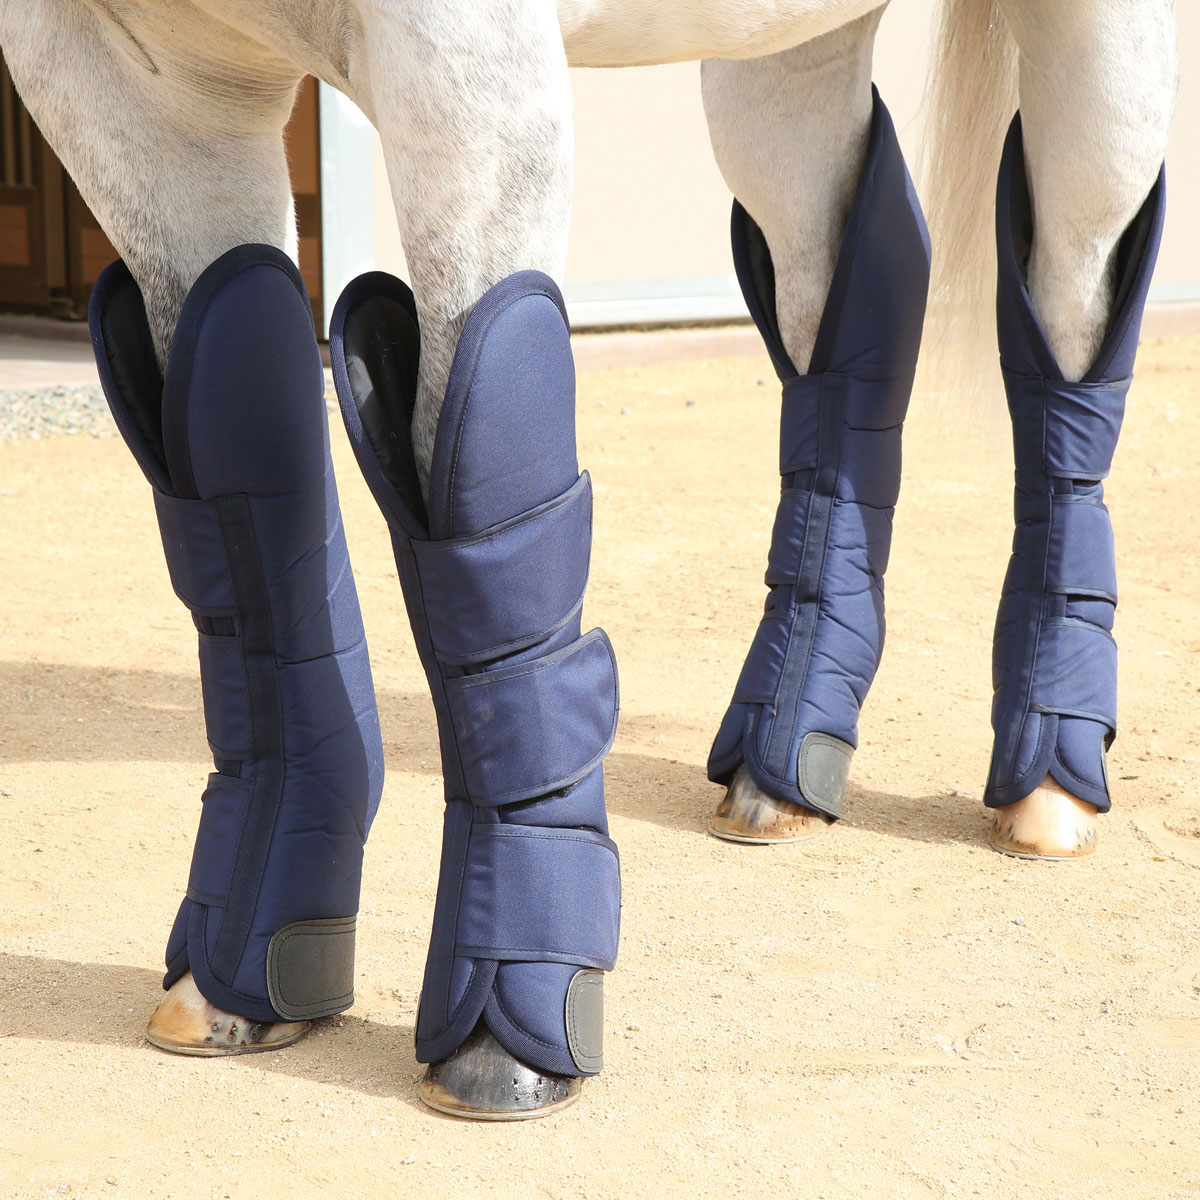 Assorted colors to choose from New Horse Shipping boots set of 4 987 